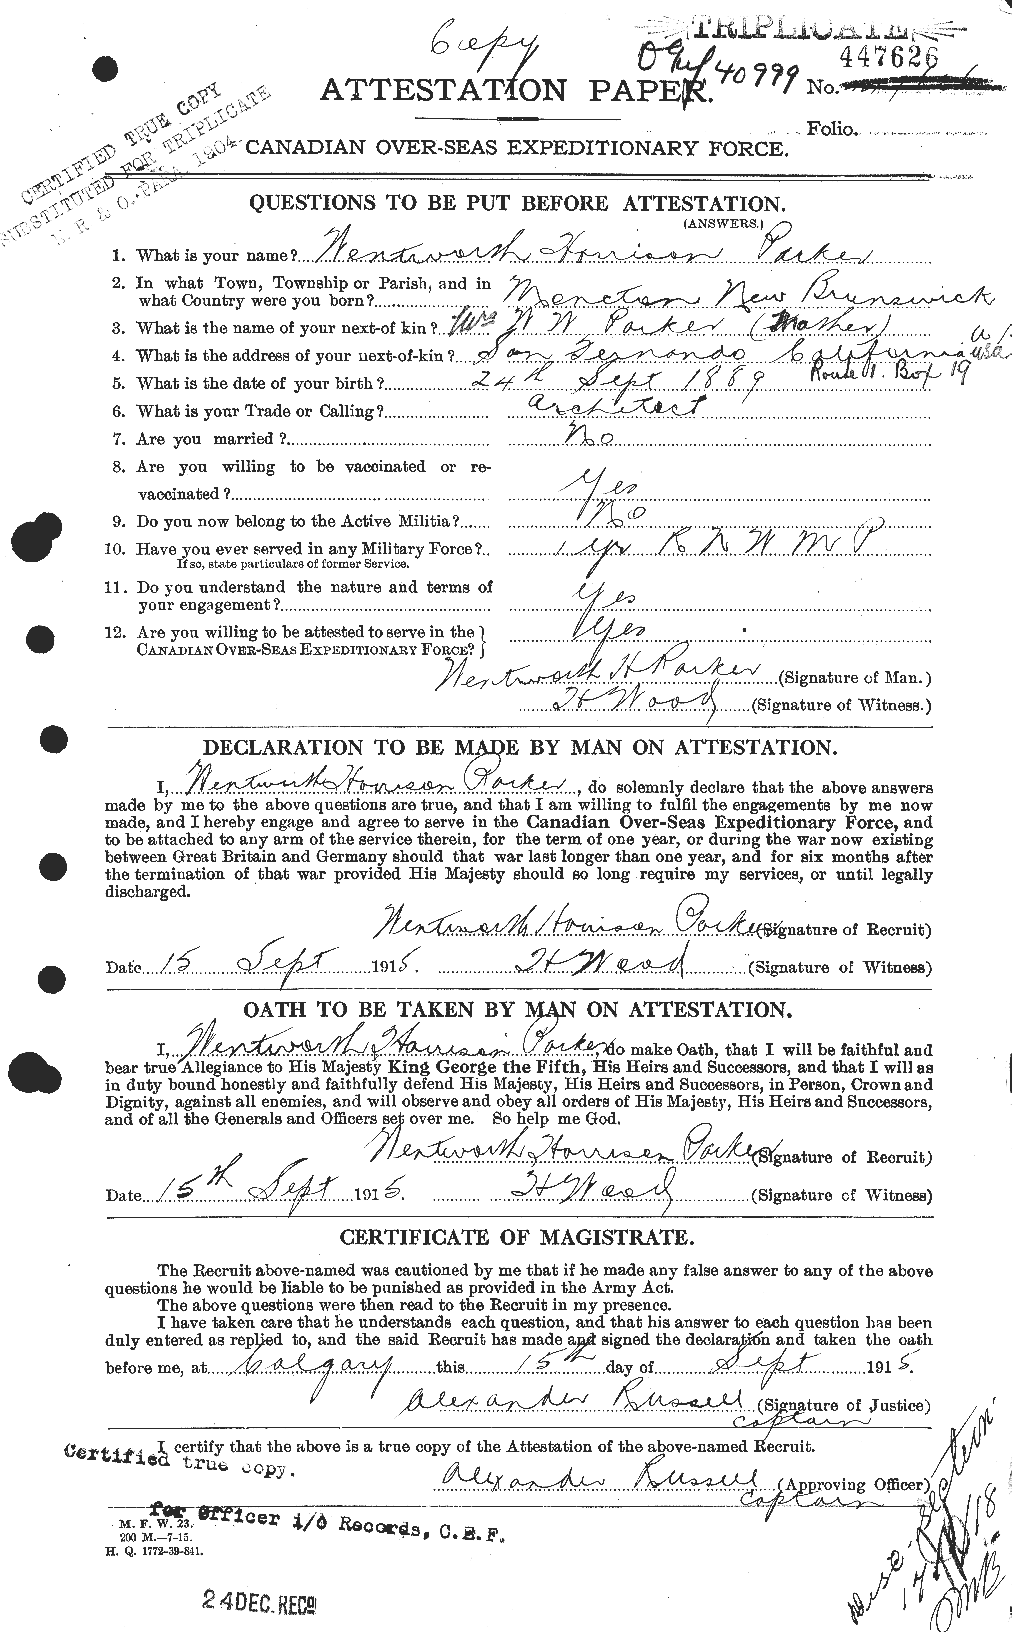 Personnel Records of the First World War - CEF 565703a